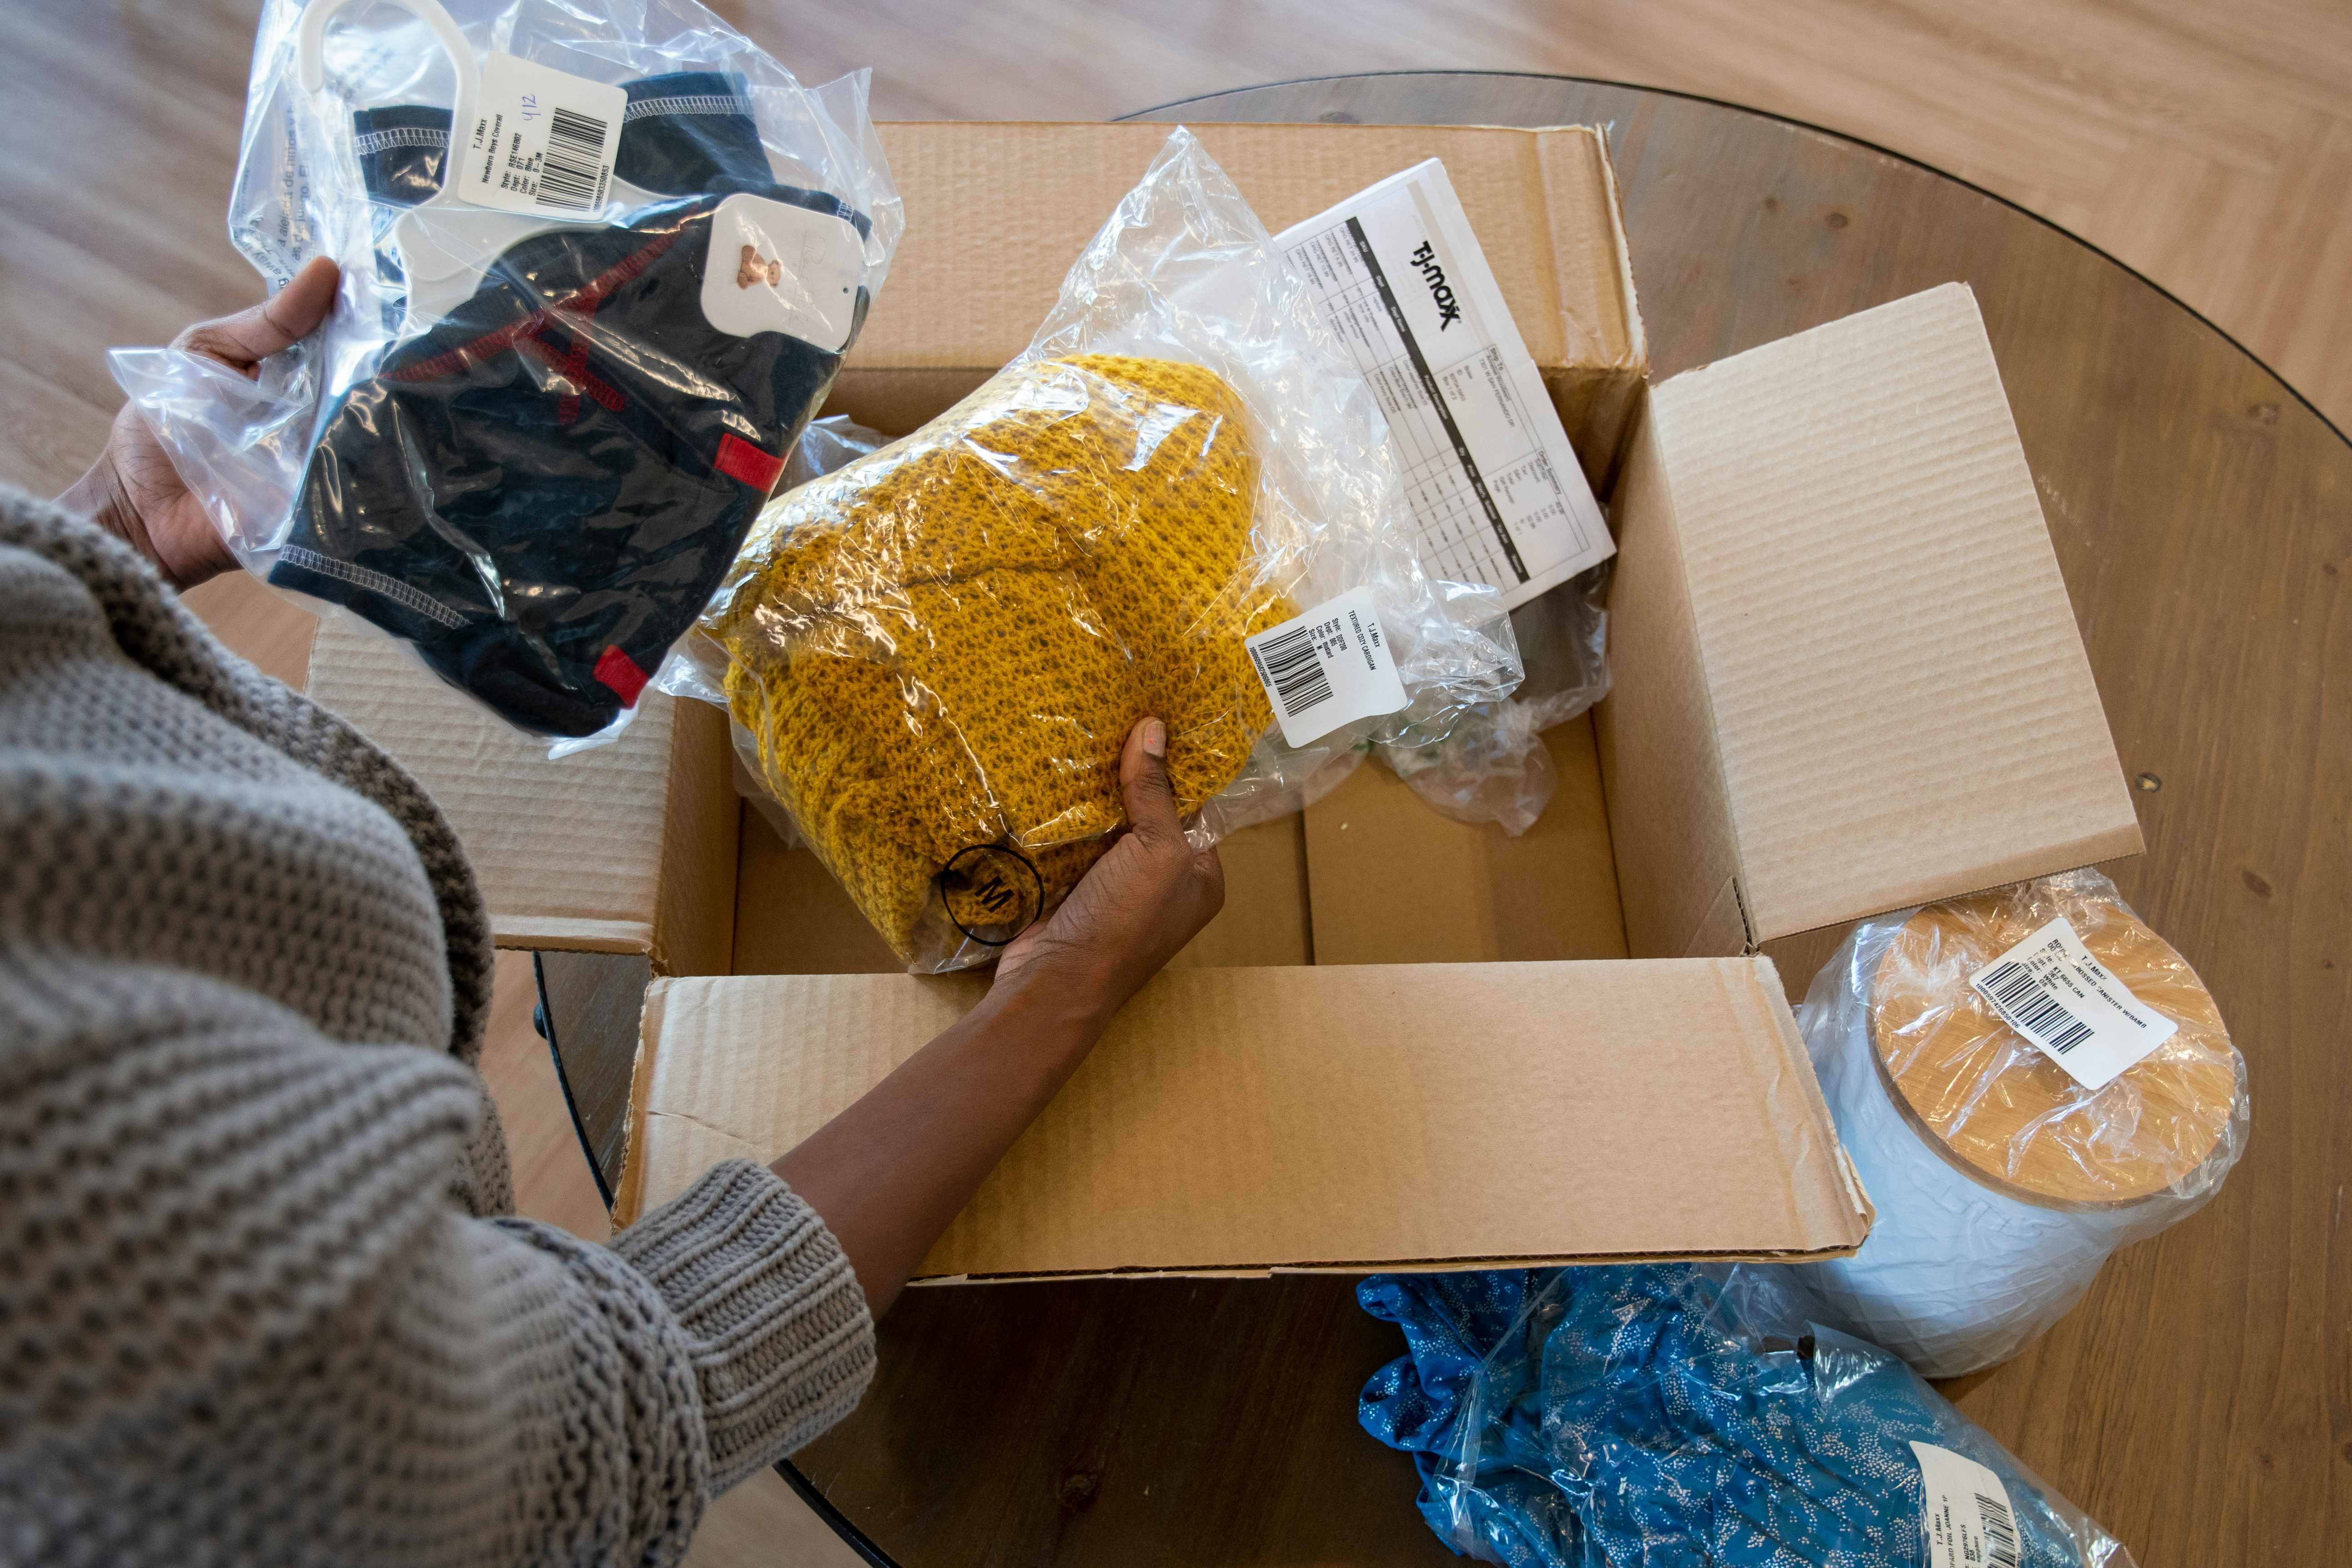 A woman pulling products wrapped in plastic from a large cardboard box. A T.J.Maxx online order receipt is visible in the background.